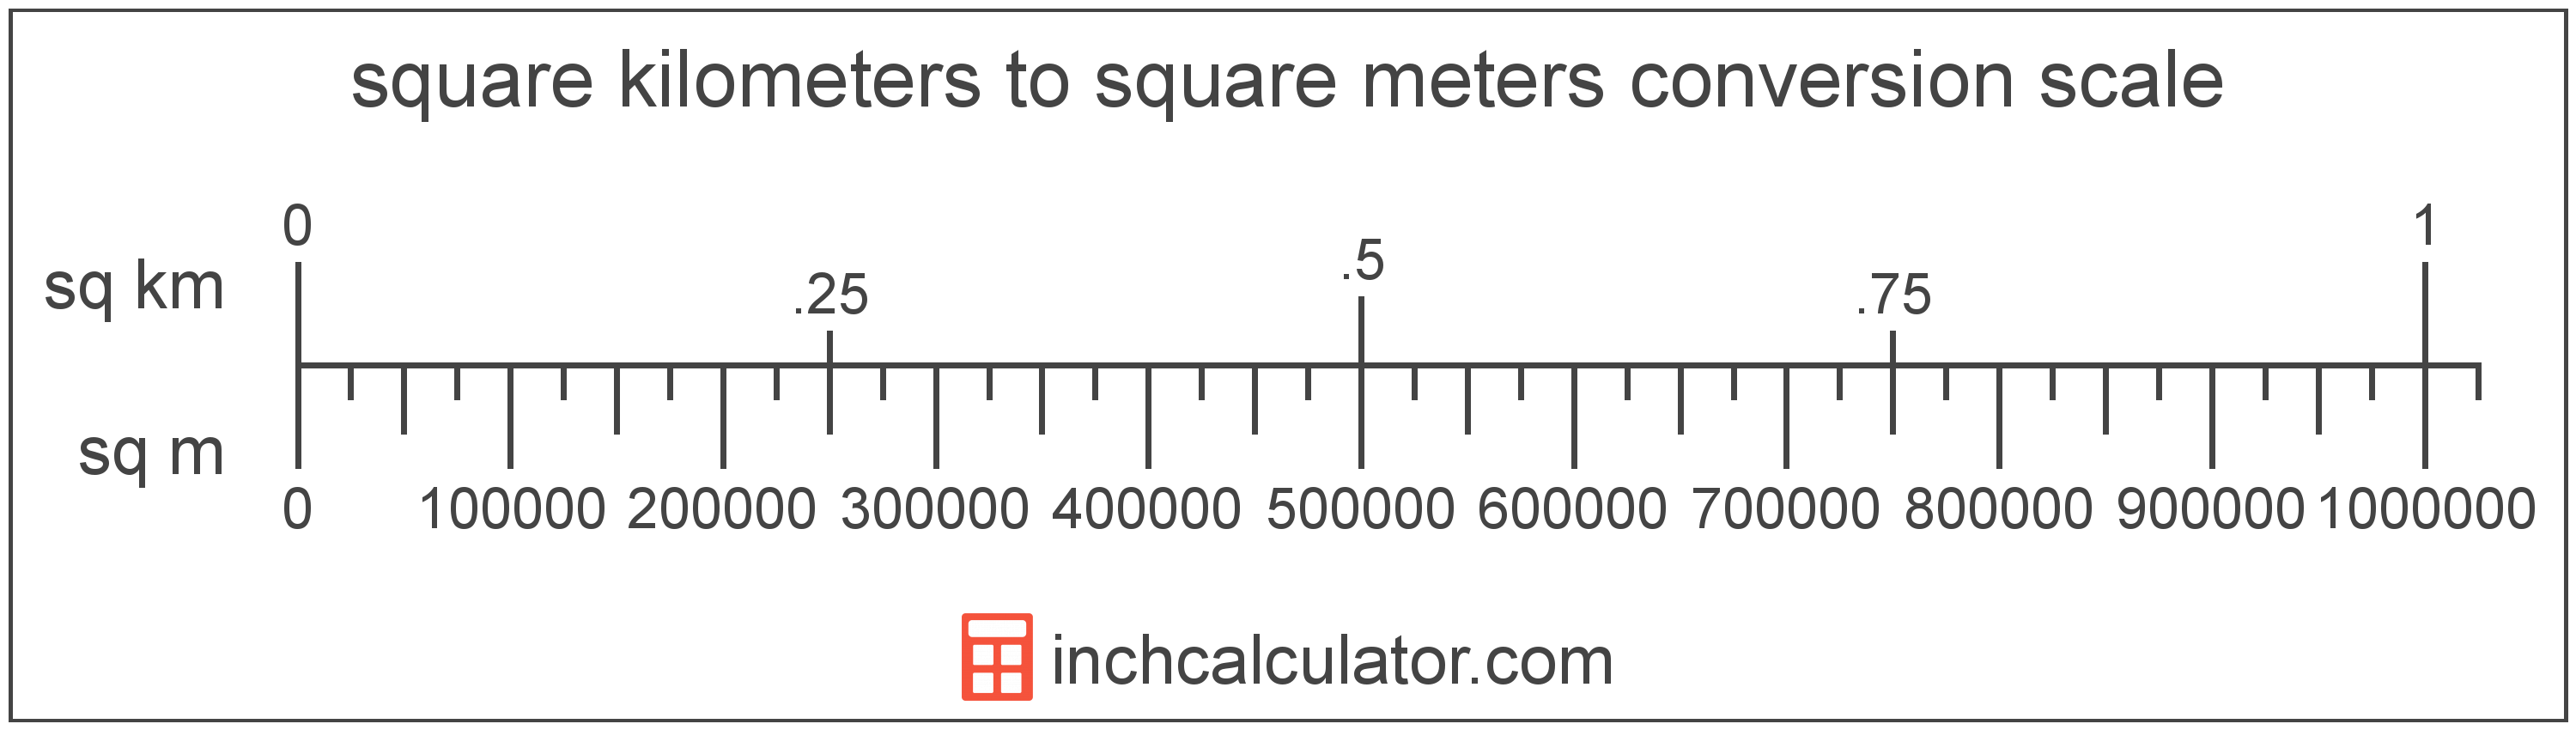 conversion scale showing square meters and equivalent square kilometers area values